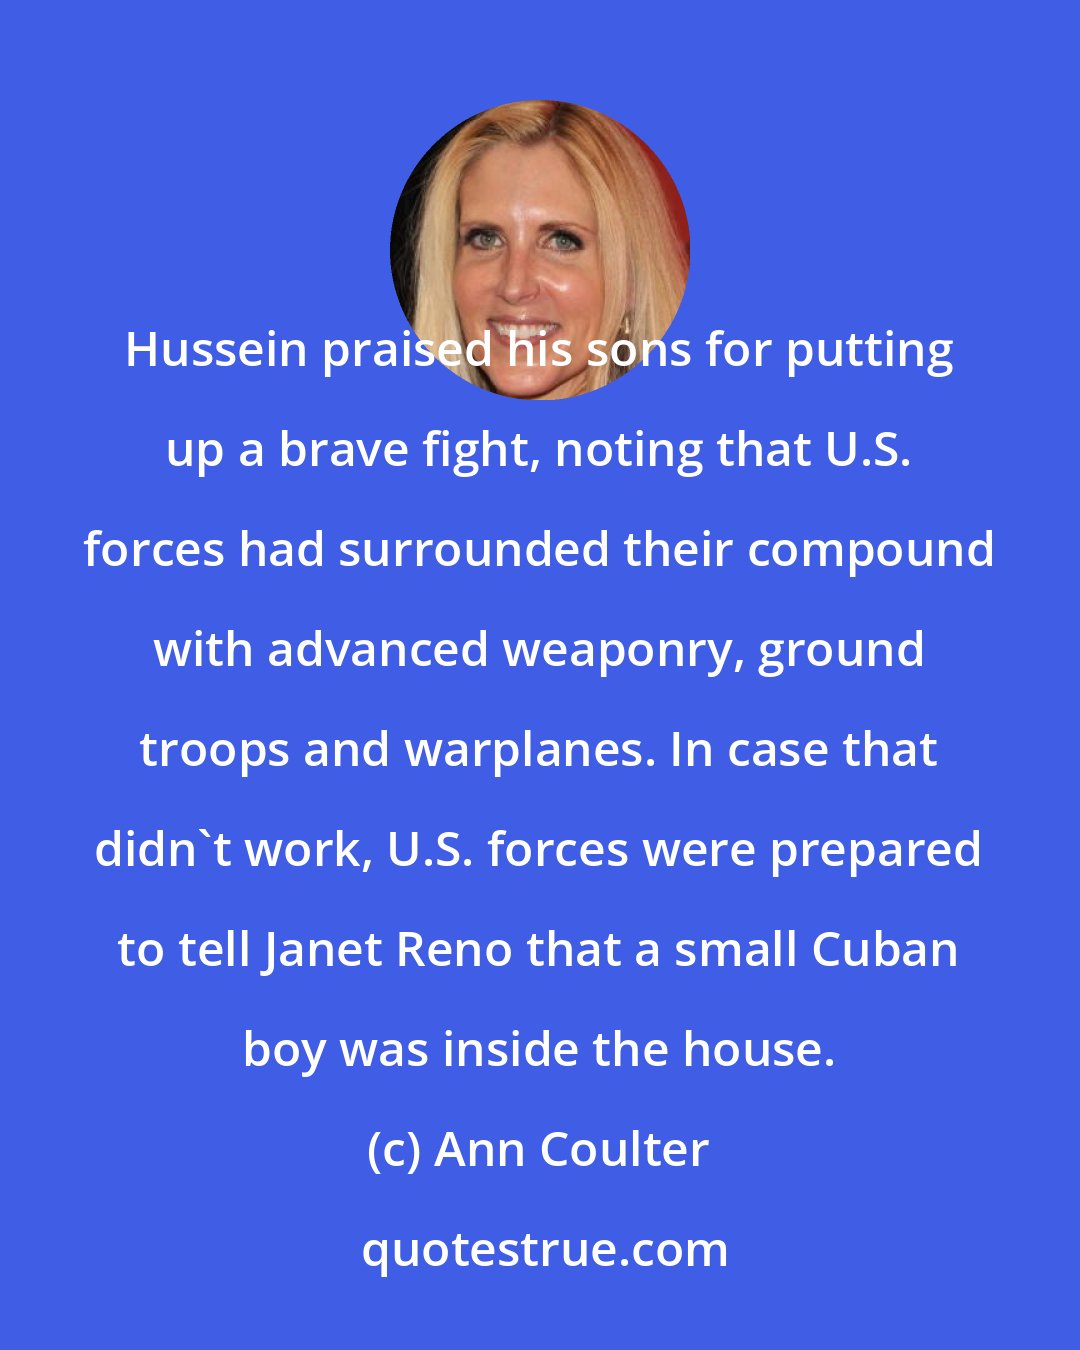 Ann Coulter: Hussein praised his sons for putting up a brave fight, noting that U.S. forces had surrounded their compound with advanced weaponry, ground troops and warplanes. In case that didn't work, U.S. forces were prepared to tell Janet Reno that a small Cuban boy was inside the house.